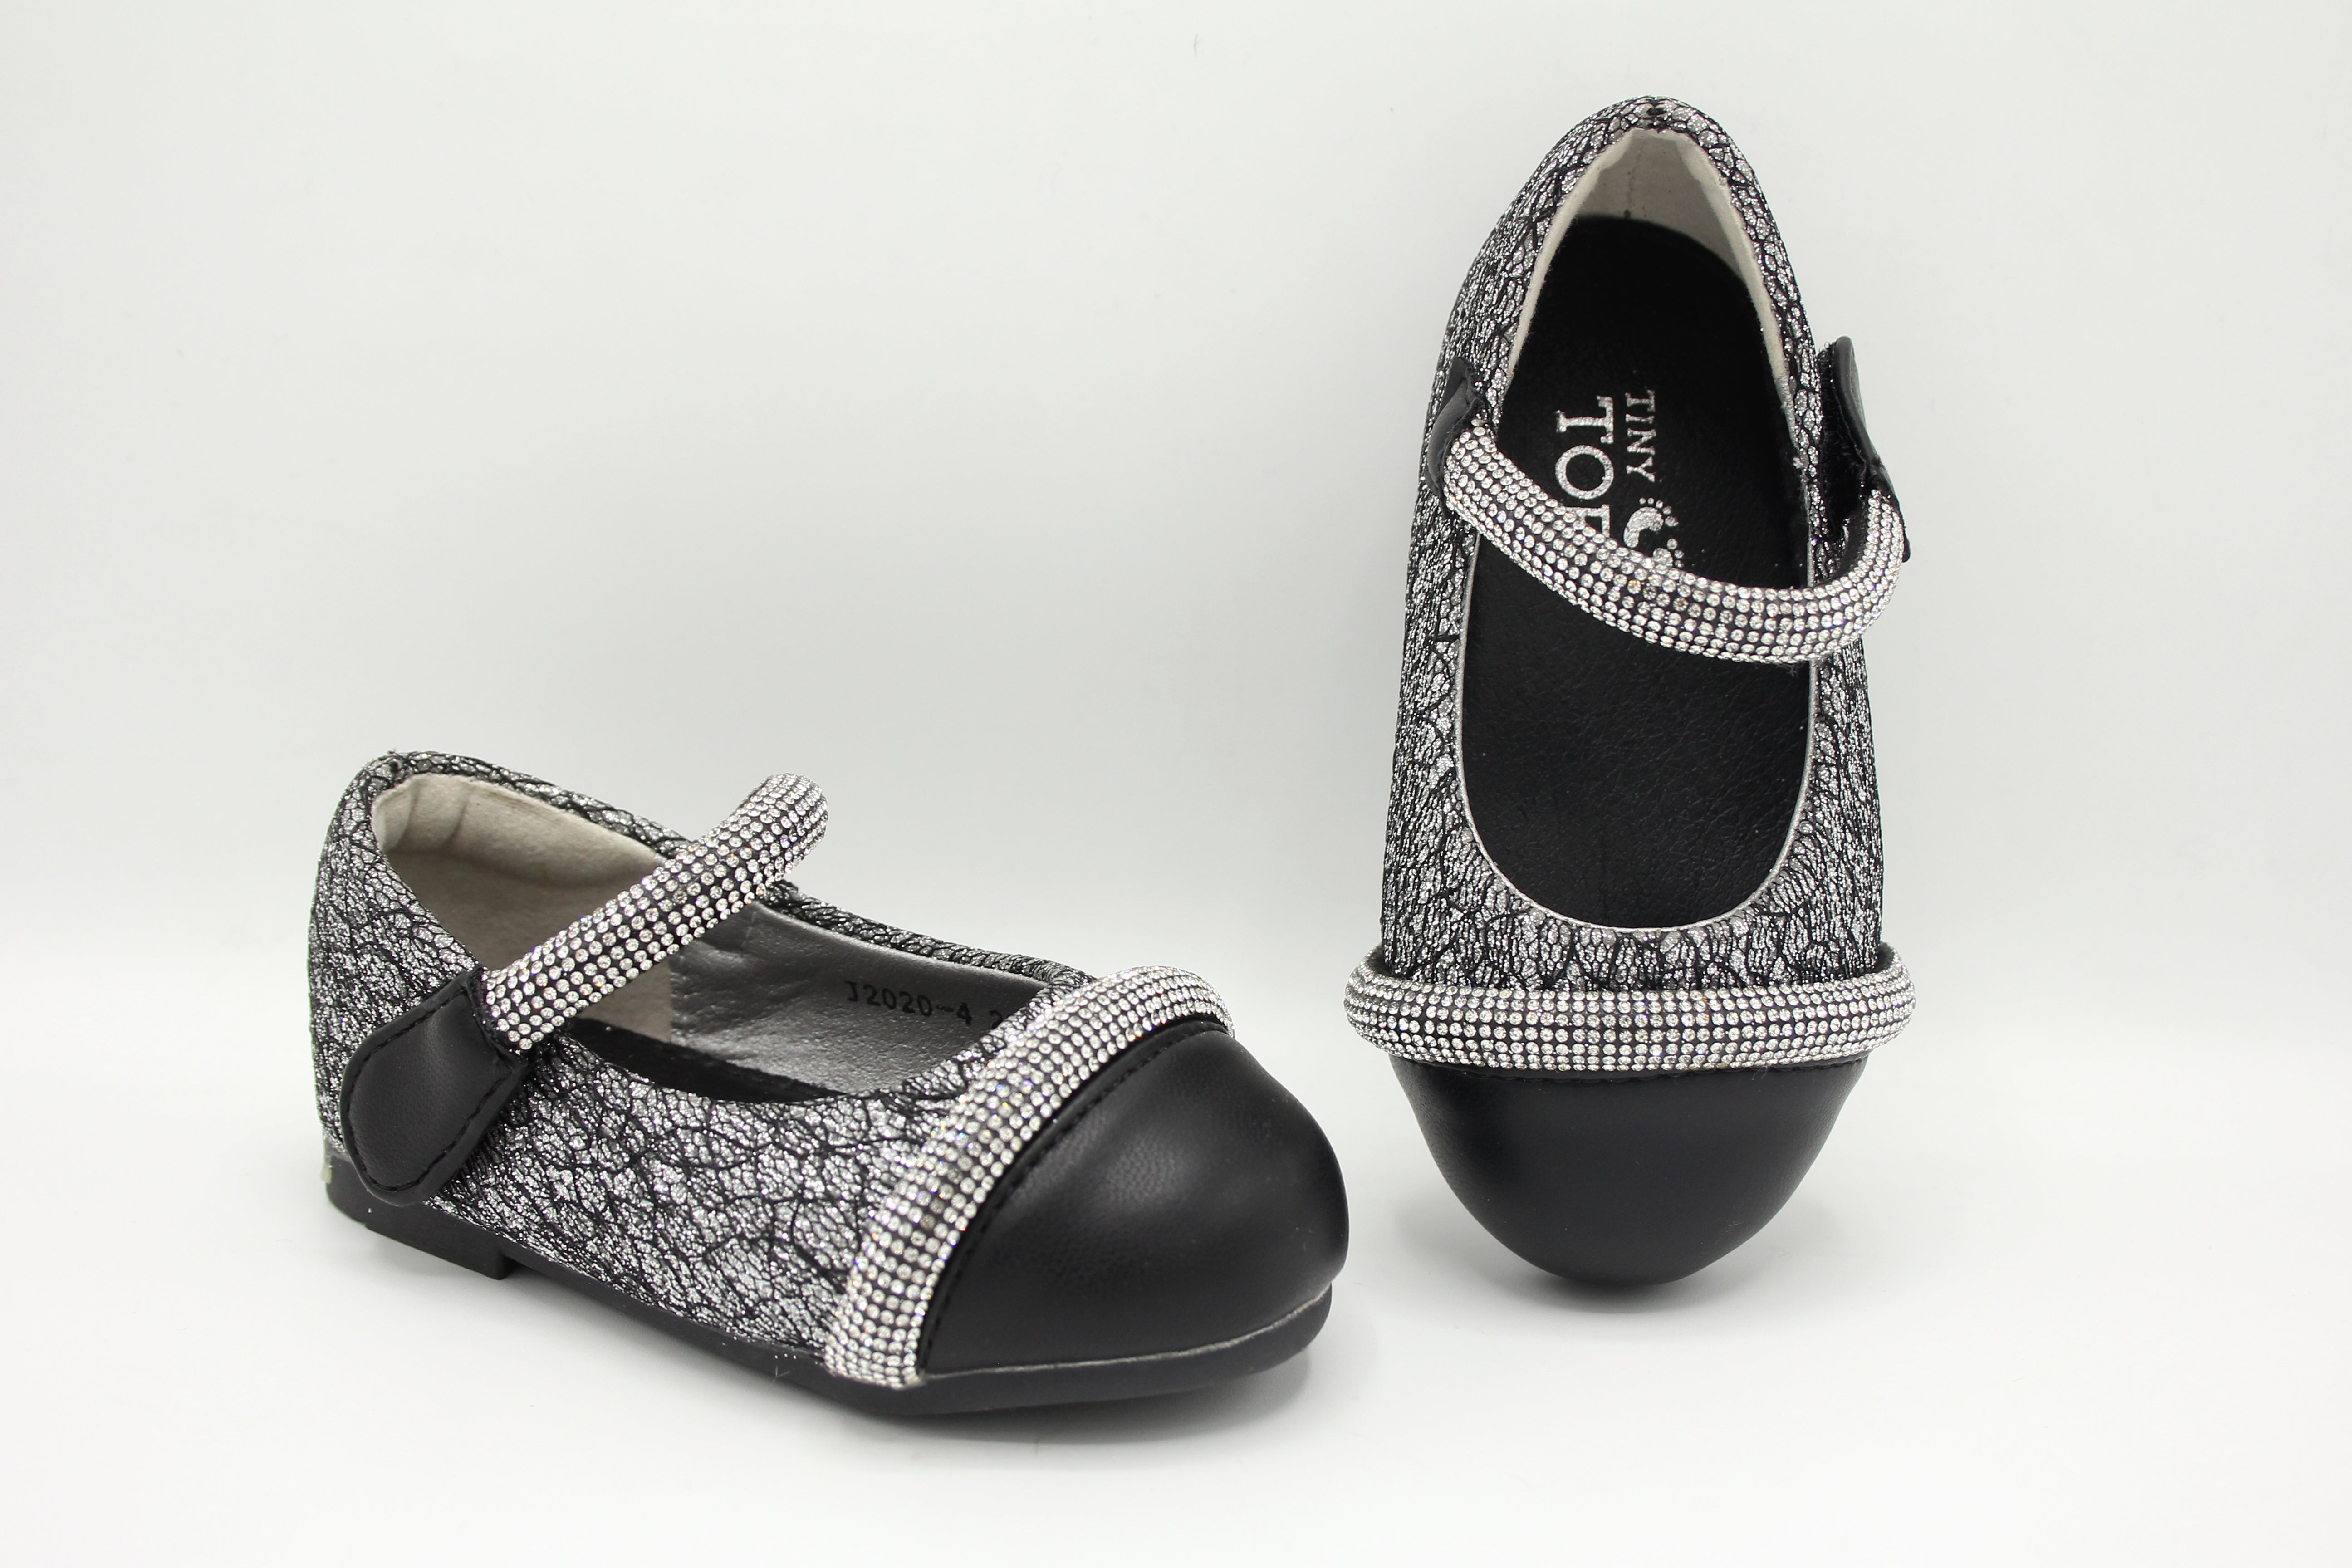 BABY GIRL SMALL PUMPS 20-25 - 30015